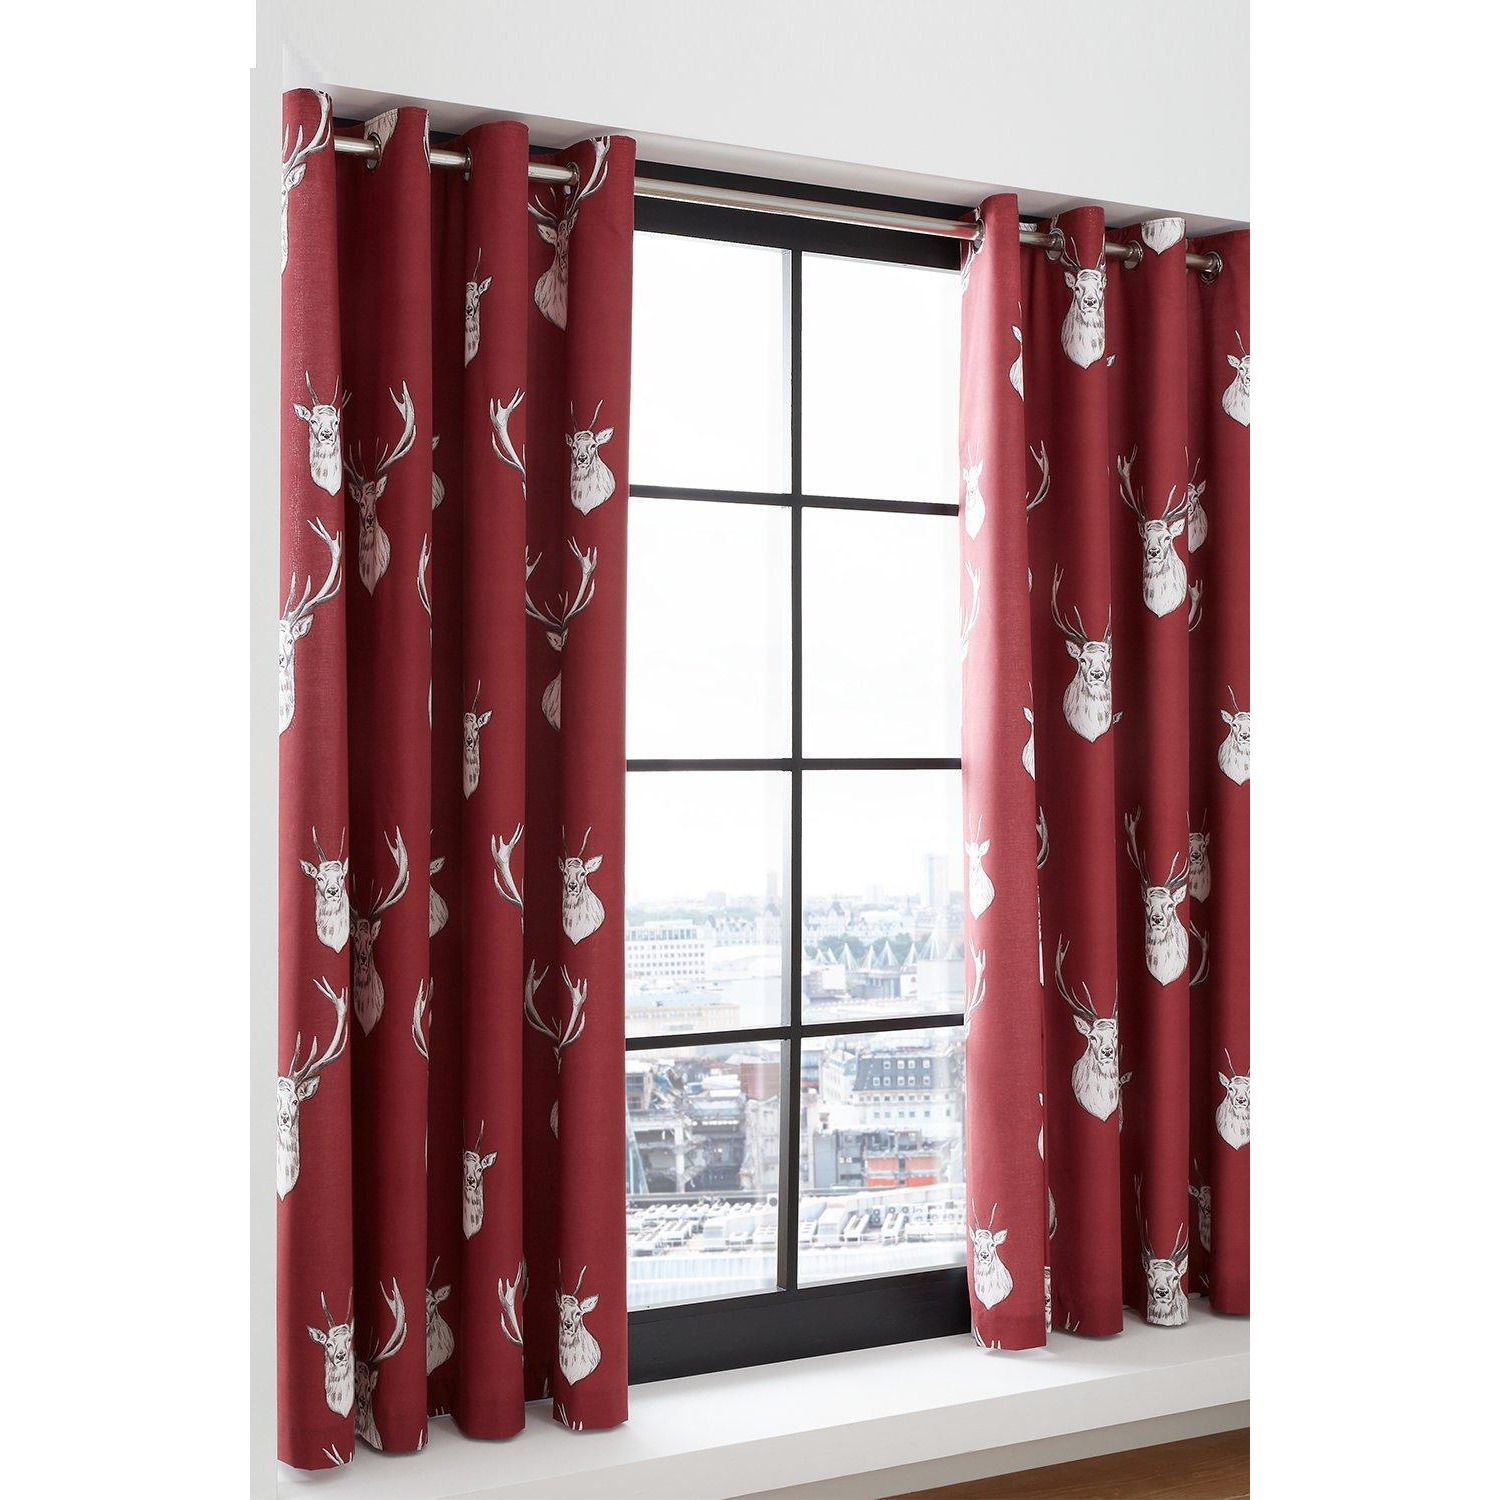 'Munro Stag Check' Lined Curtains - image 1